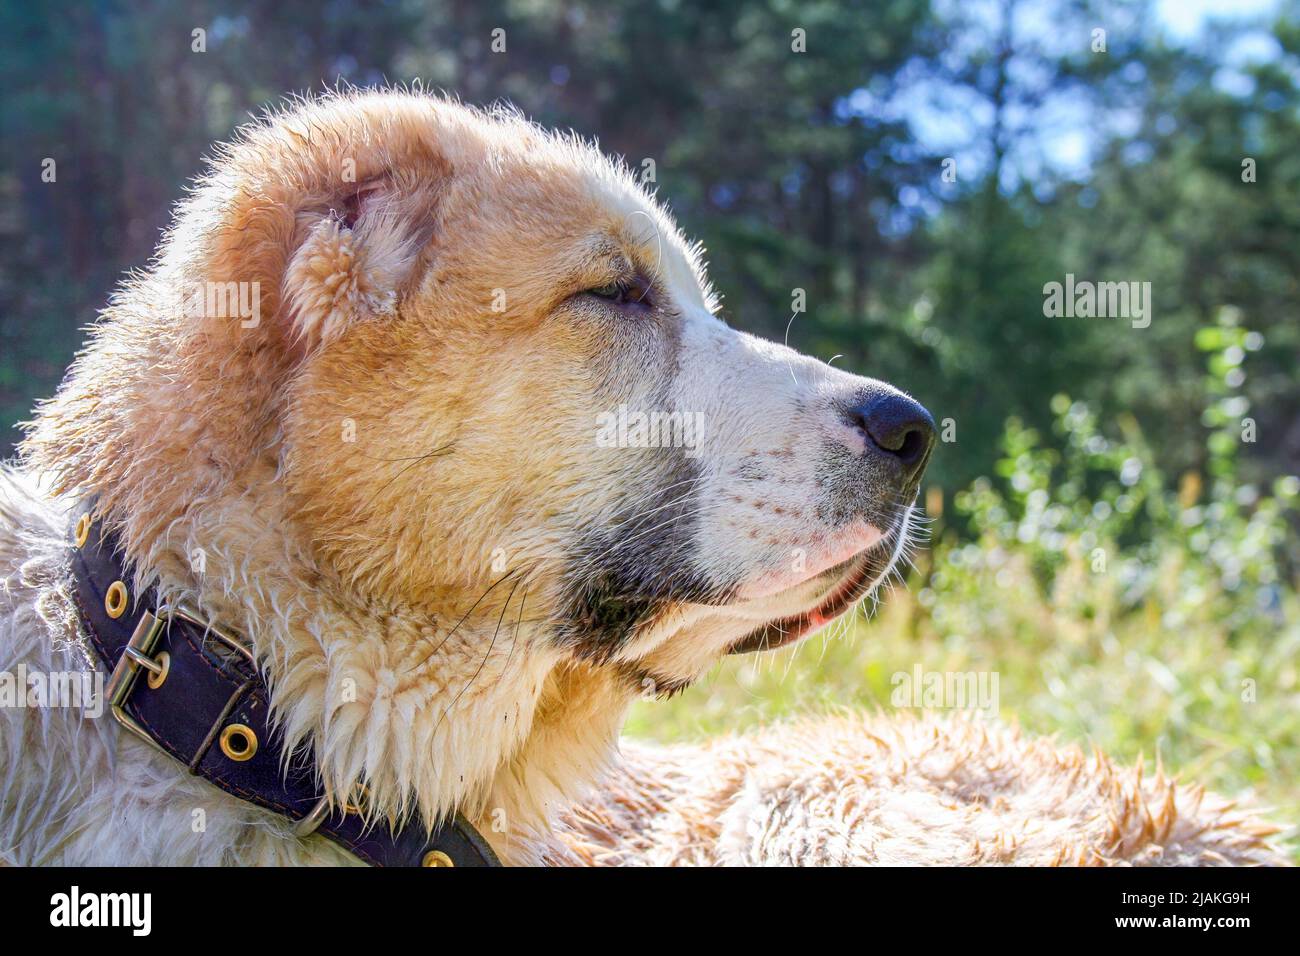 Central Asian Shepherd Dog, Alabay or Alabai is a livestock guardian dog breed. Close-up. Portrait Stock Photo